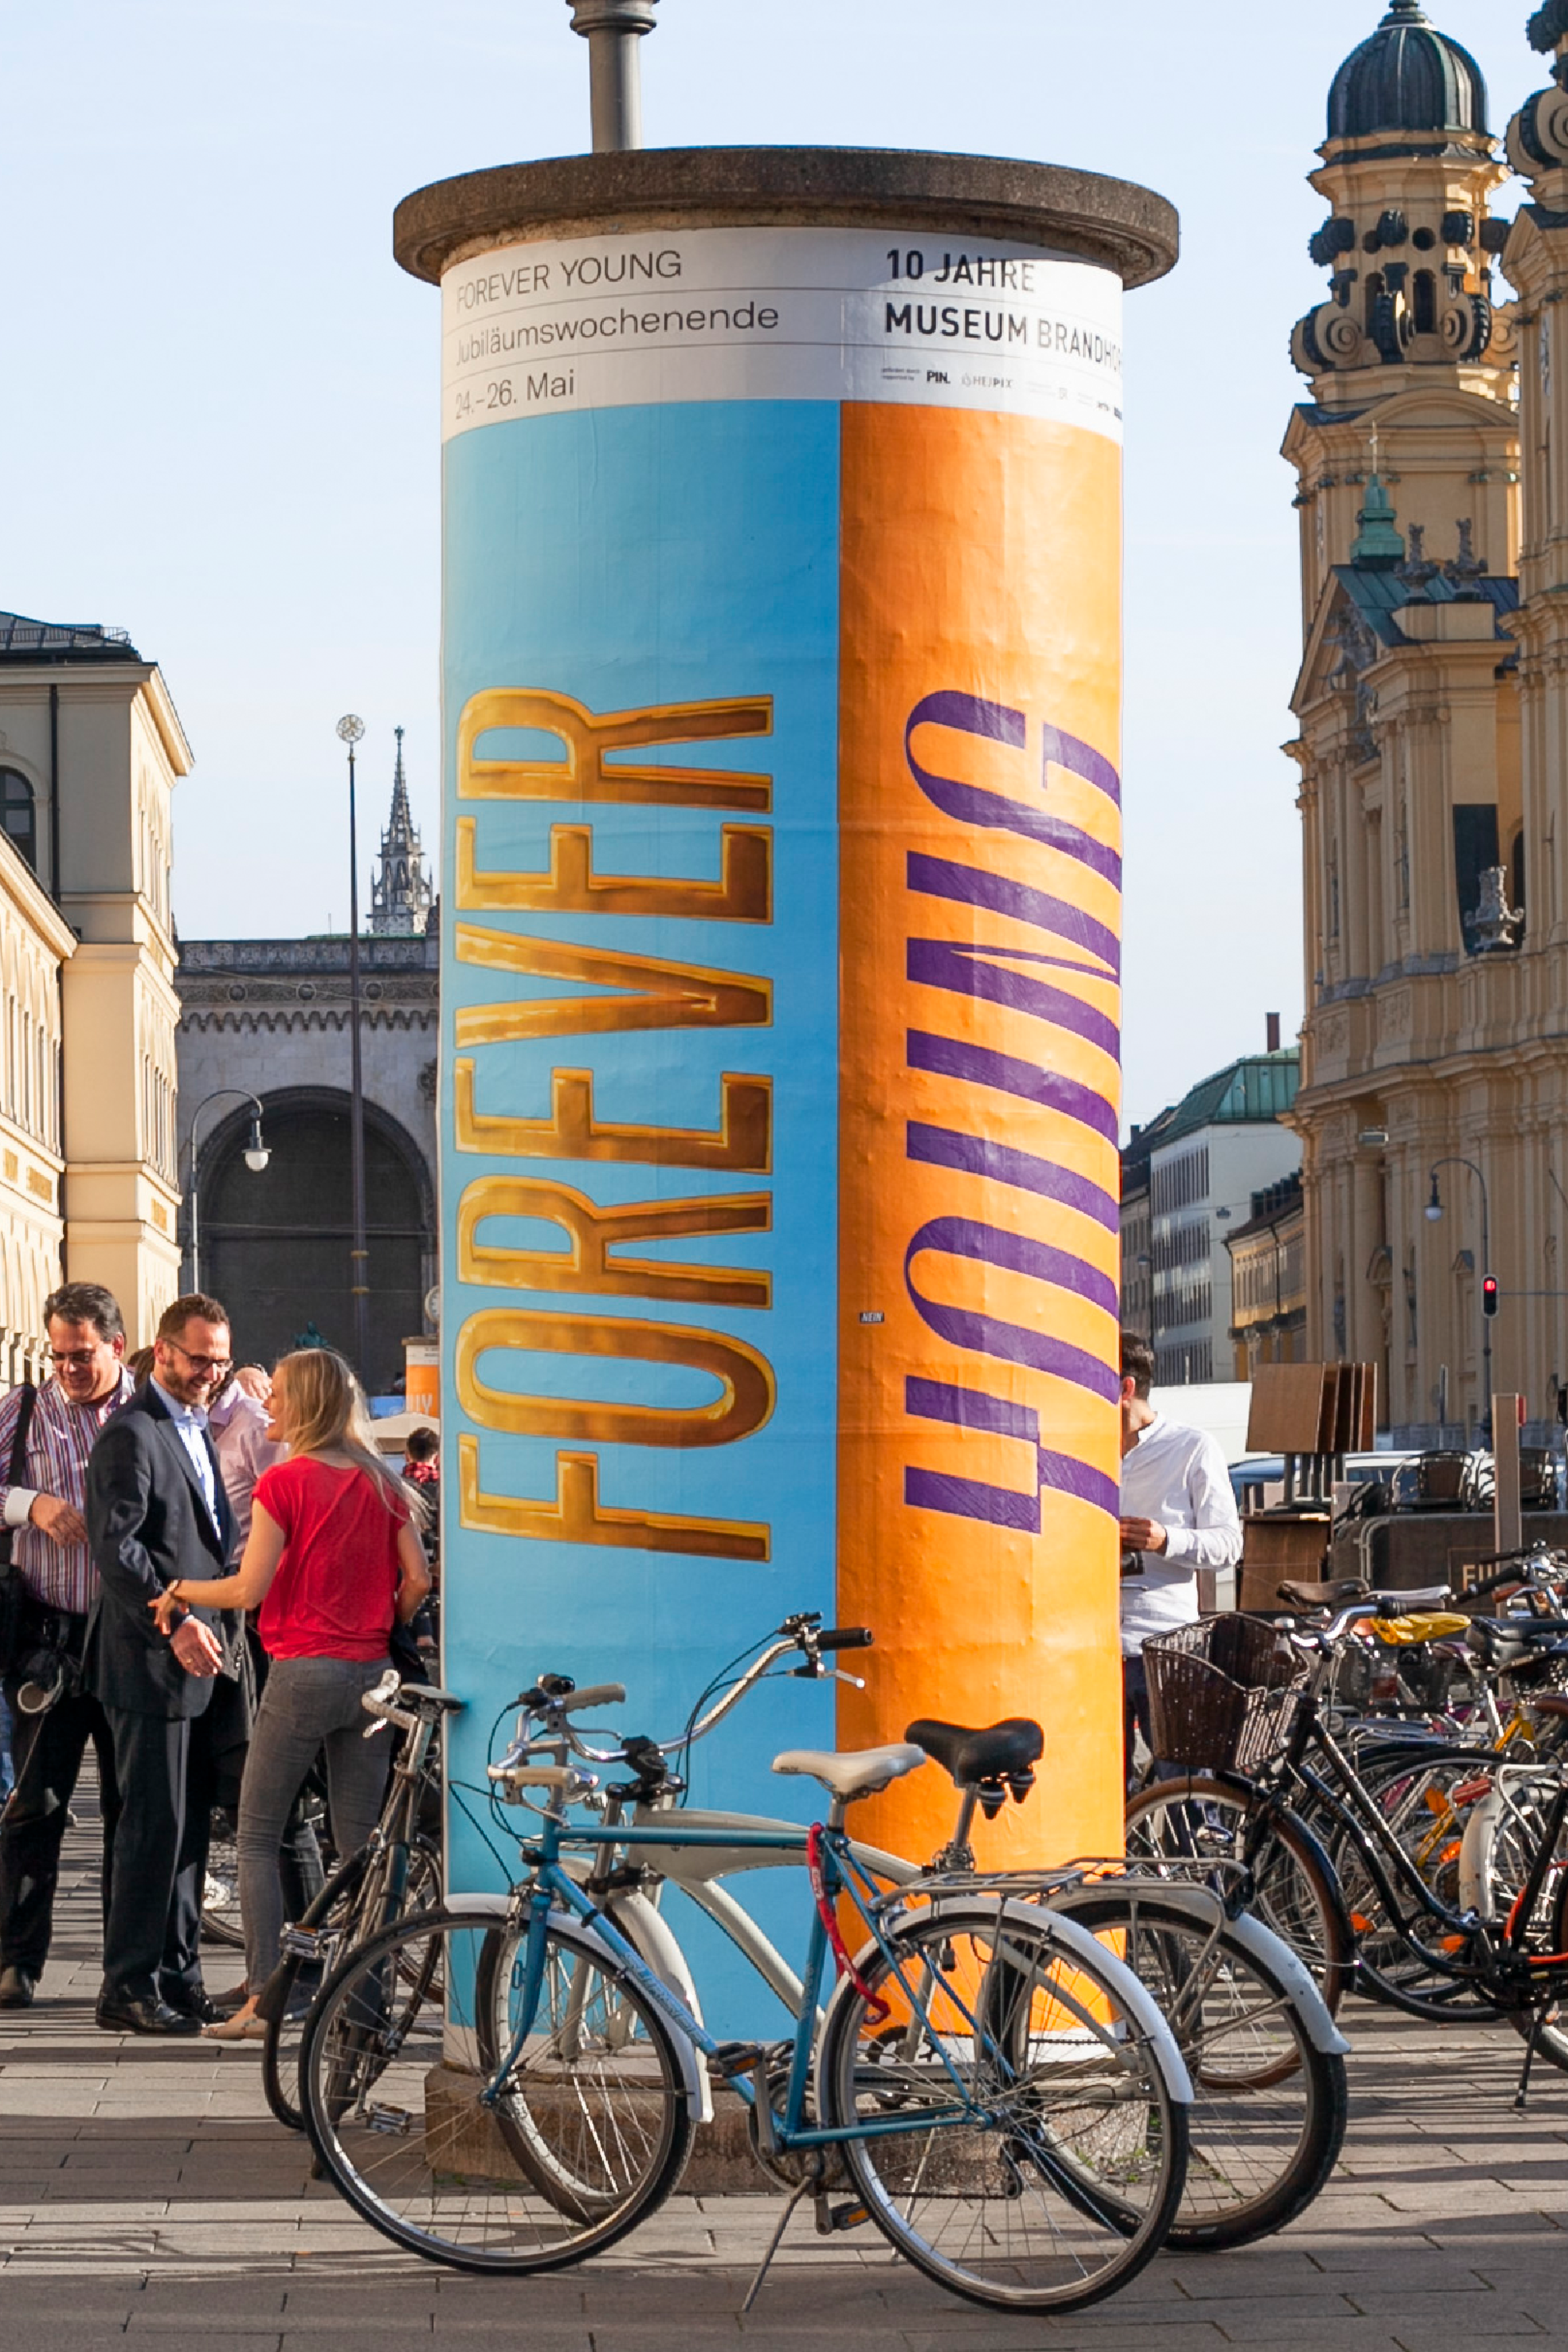 "Forever Young" campaign on a advertising pillar in Munich.